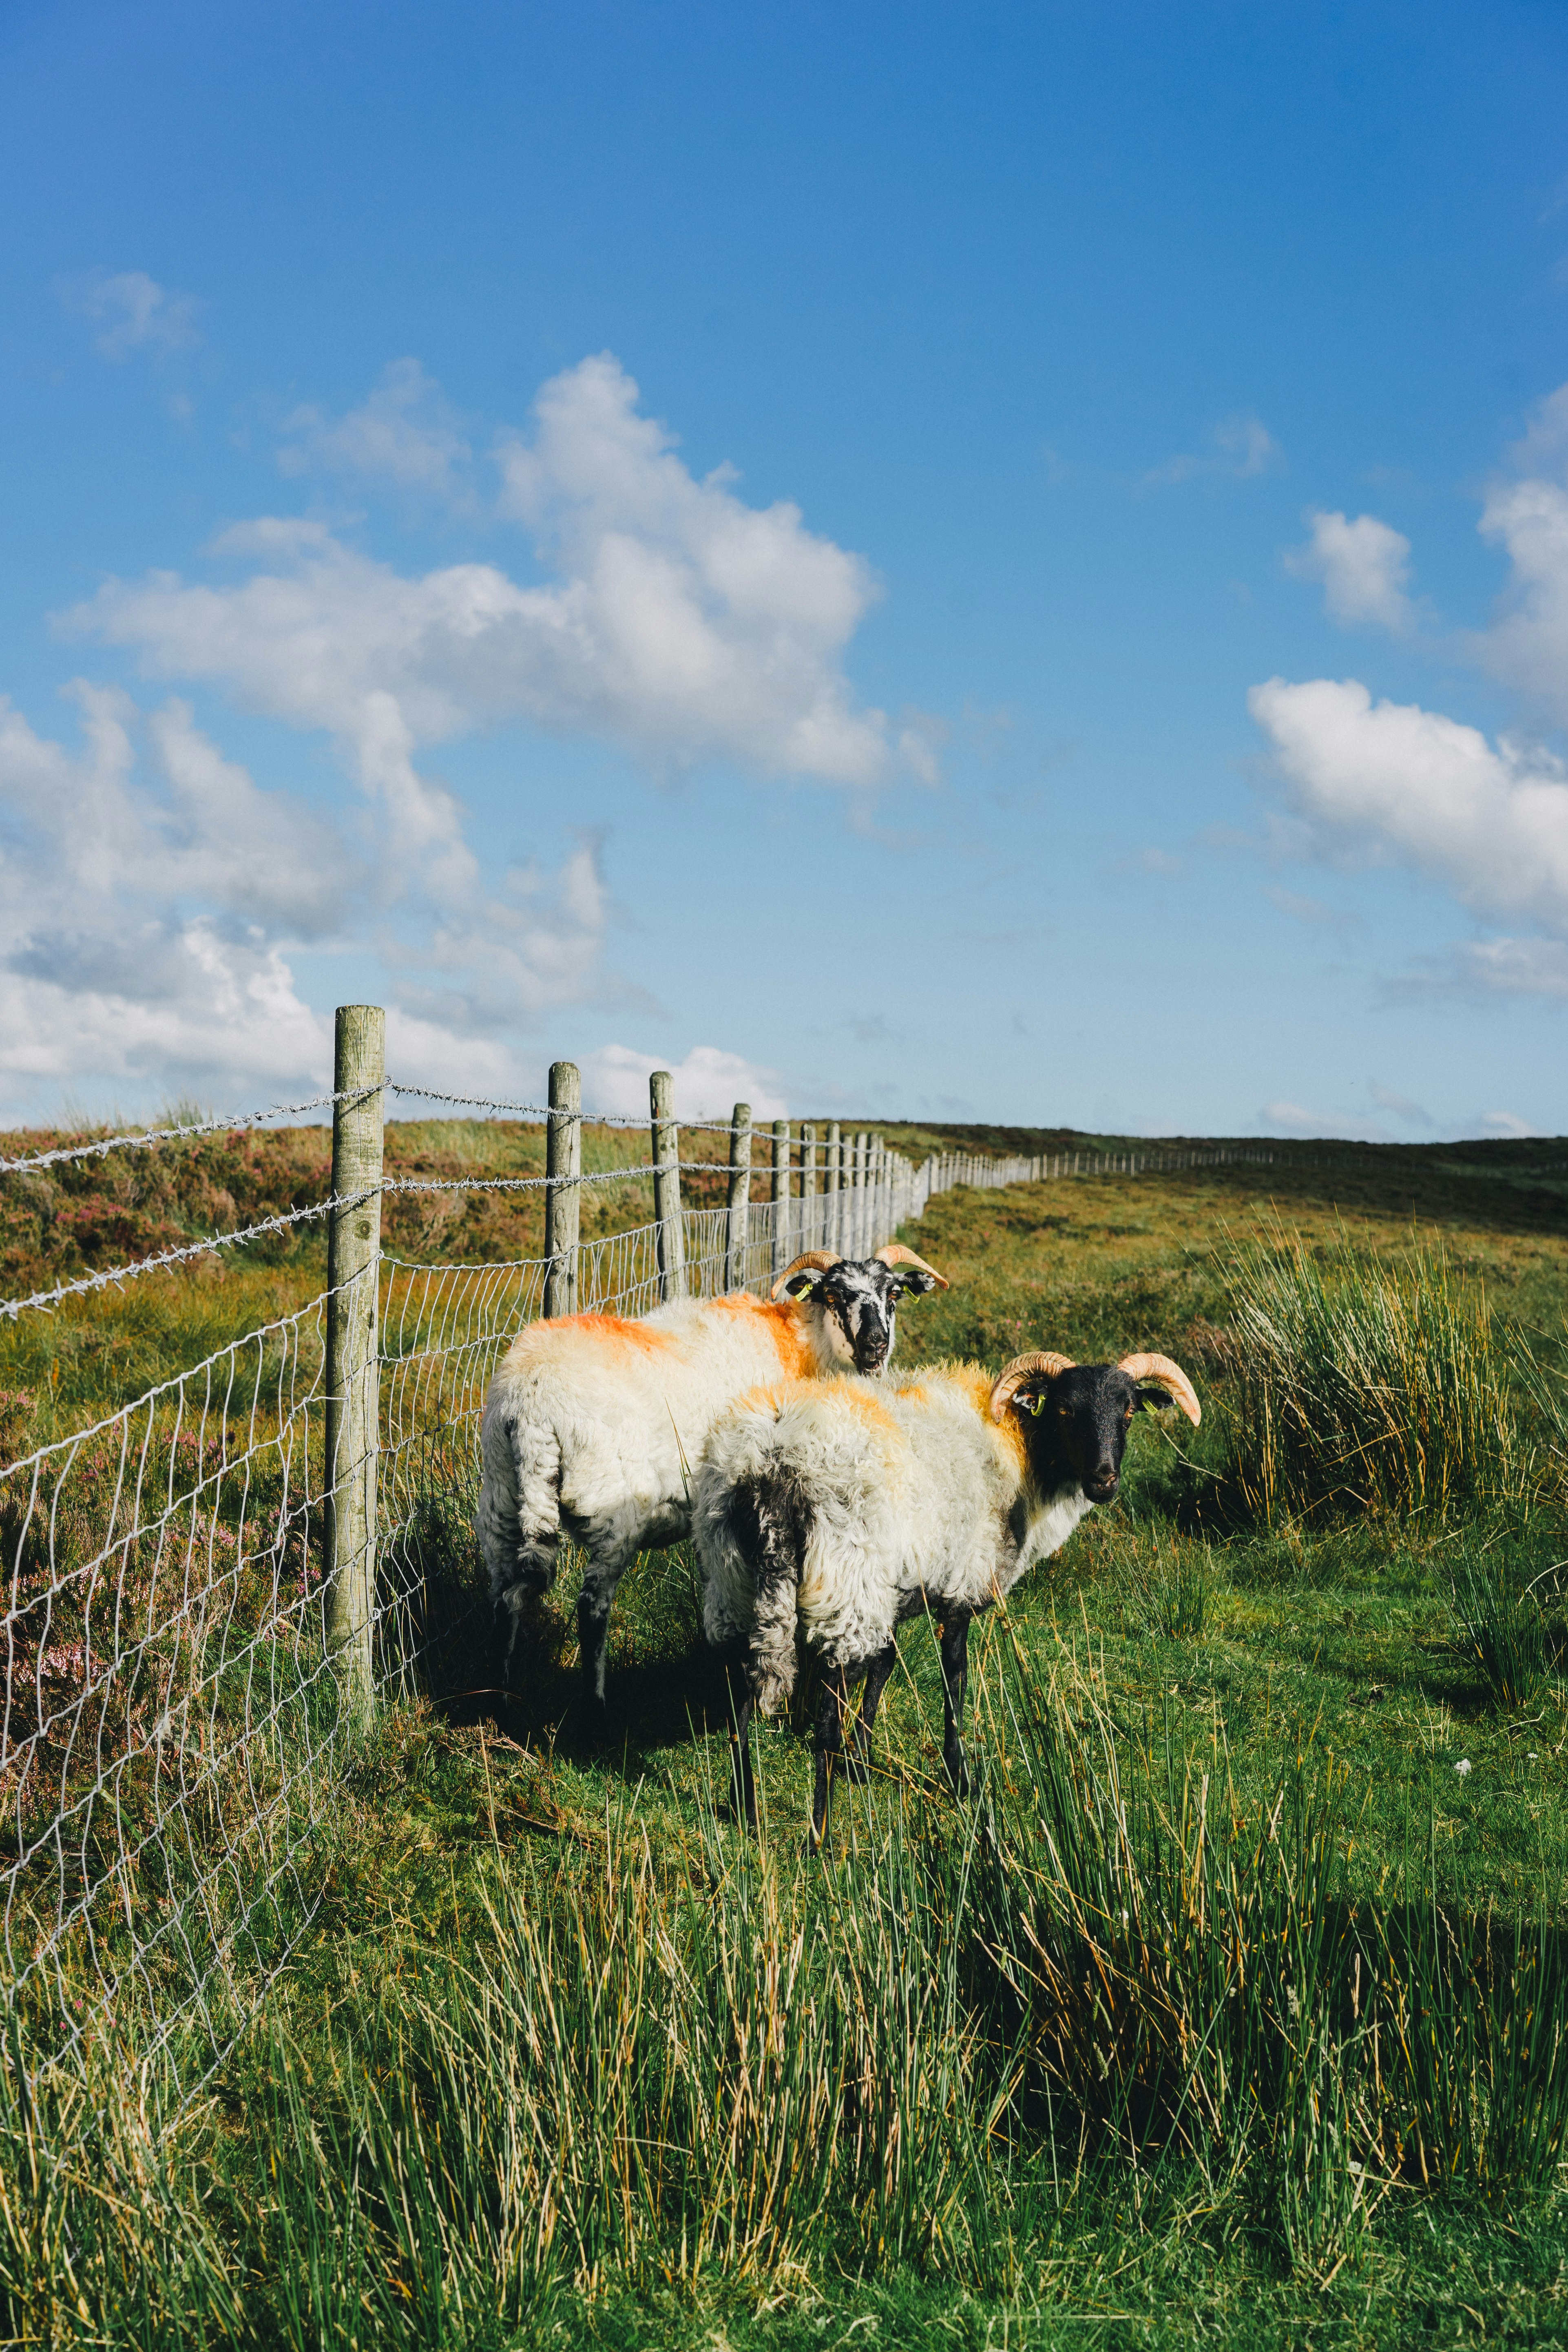 white and black sheep on green grass field under blue sky during daytime